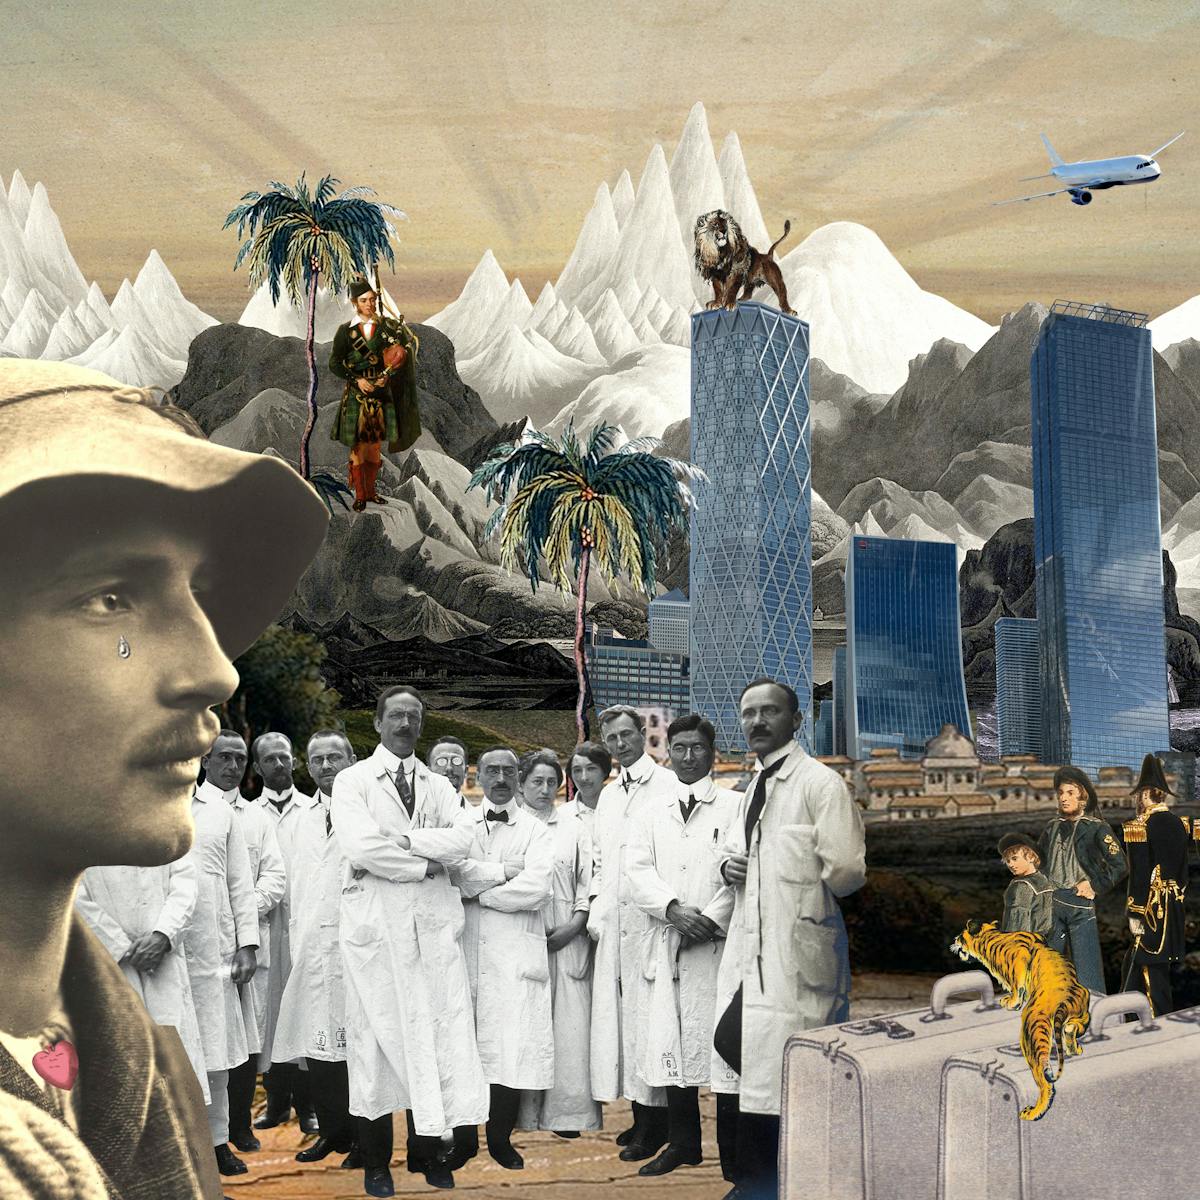 Artwork using collage.  The collaged elements are made up archive material which includes, vintage photographs, etchings, painted illustrations, lithographic prints and line drawings. This artwork depicts a scene with an urban and rural combined background, where high snow covered mountain peaks rise in the distance. In the middle distance a Scottish piper stands on the hillside playing bagpipes, a lion stands on top of a cluster of large glass and metal skyscrapers and a tall ship in full sail crosses a section of ocean. In the foreground on the left is the head of a man who looks a little like an explorer with a rope over his shoulder and a hat on his head. A tear falls from his eye. Next to him stands a group of doctors all wearing white knee length lab coats. Next to them are a couple of suitcases over which a tiger is crawling. To the far right a group of french revolutionary soldiers surge forward with a tattered flag. In the sky is an aeroplane and the planet Earth.